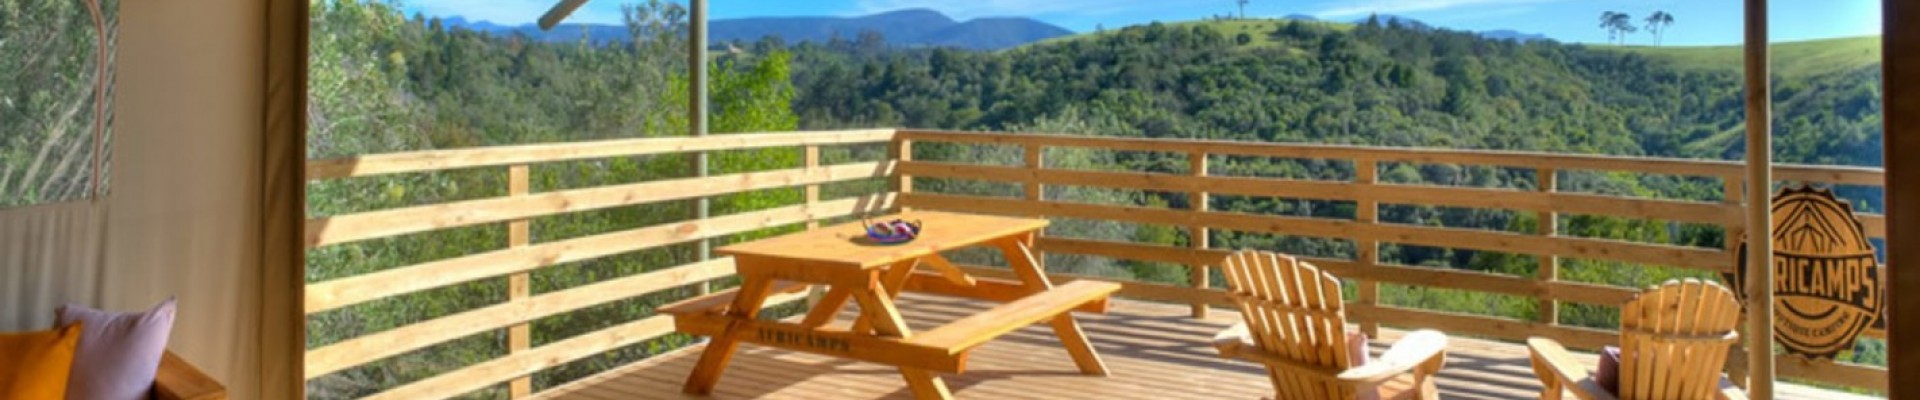 AfriCamps at Ingwe - Plettenberg Bay Package (2 Nights)